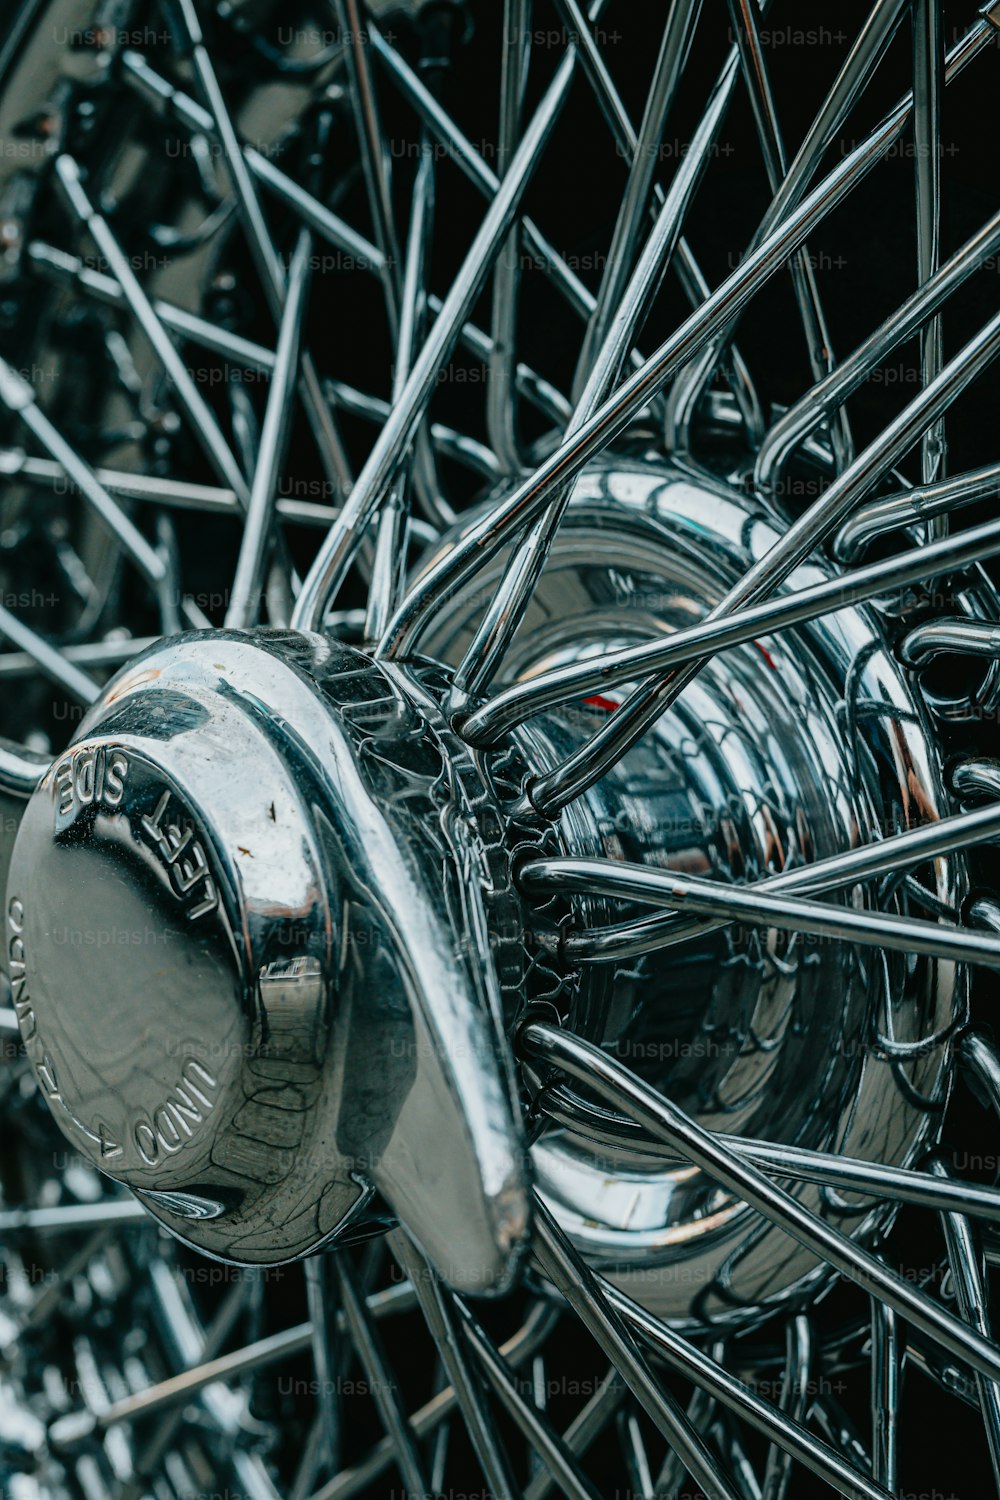 a close up of a metal object with spokes